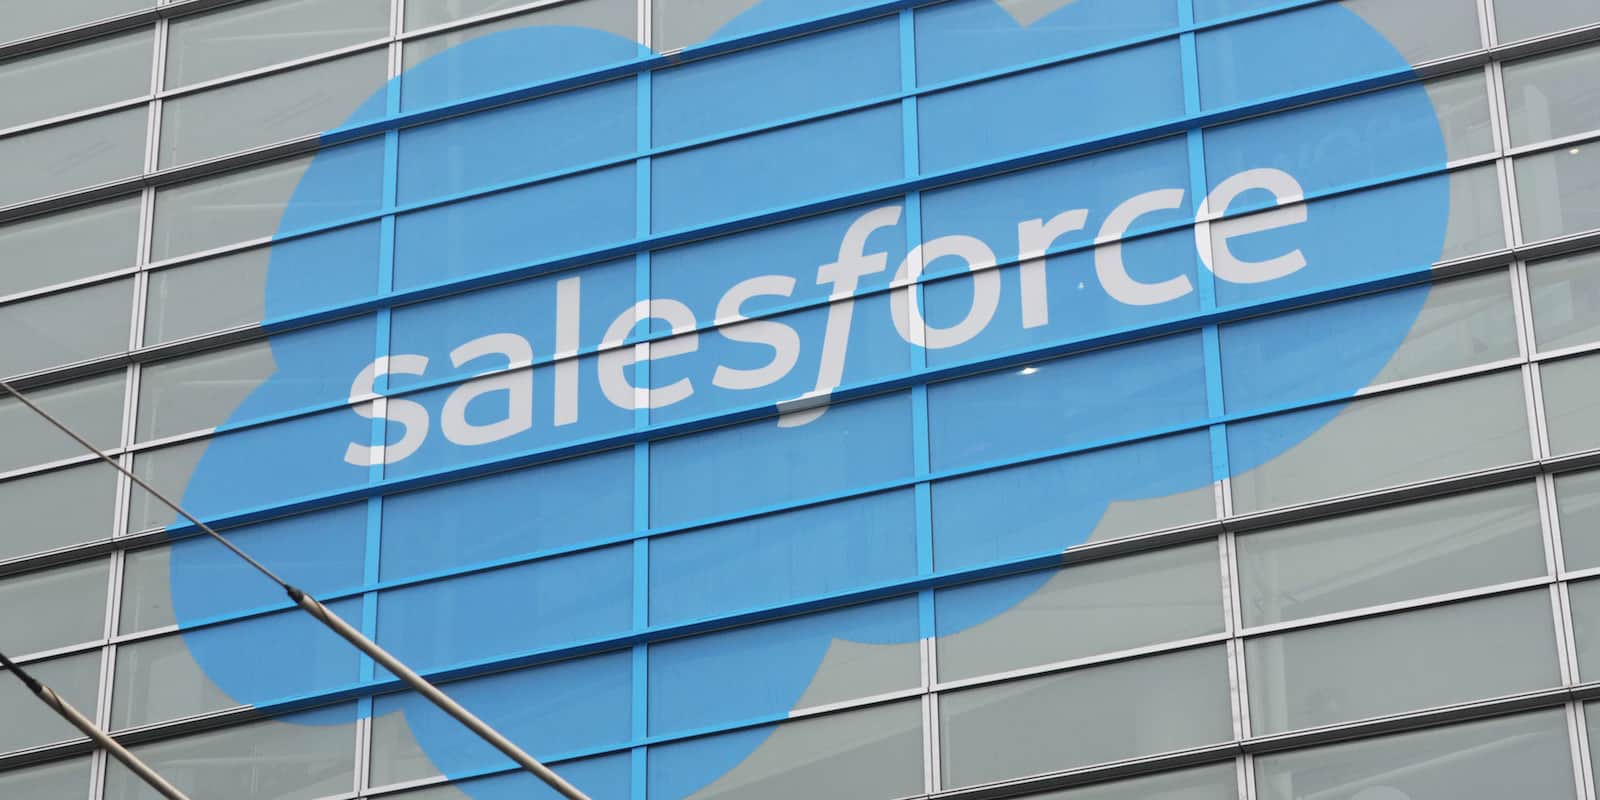 Become a master of Salesforce, the go-to customer relationship management platform.